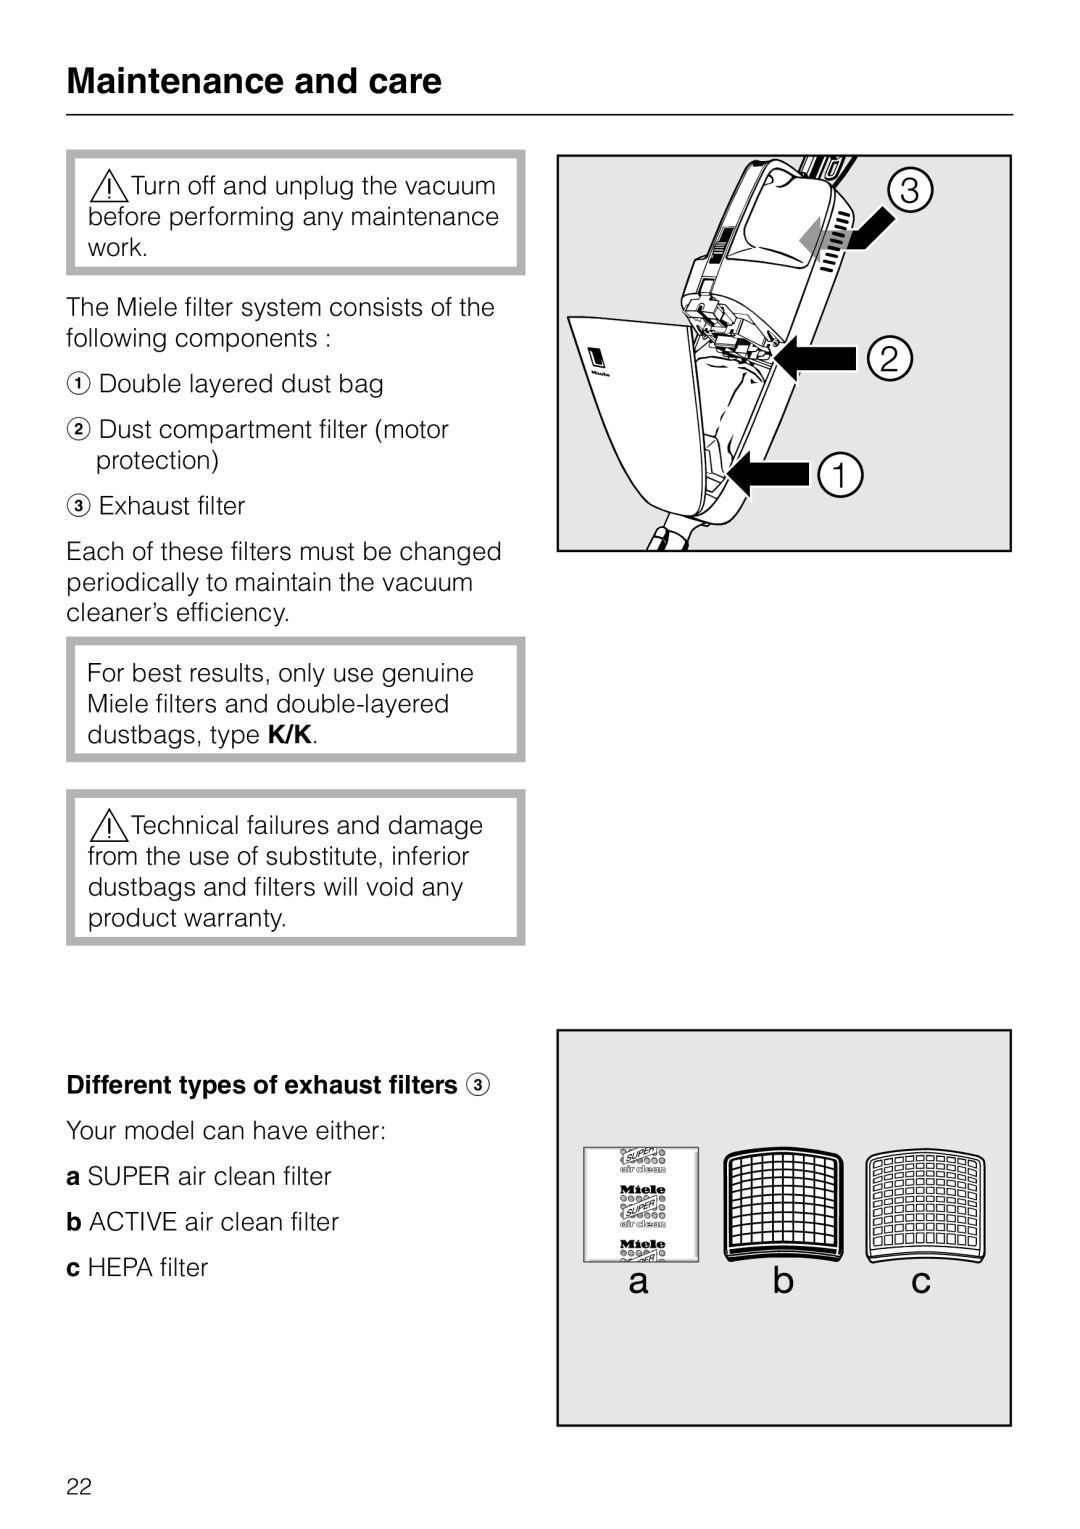 Miele S140, S160 manual Maintenance and care, Different types of exhaust filters c 